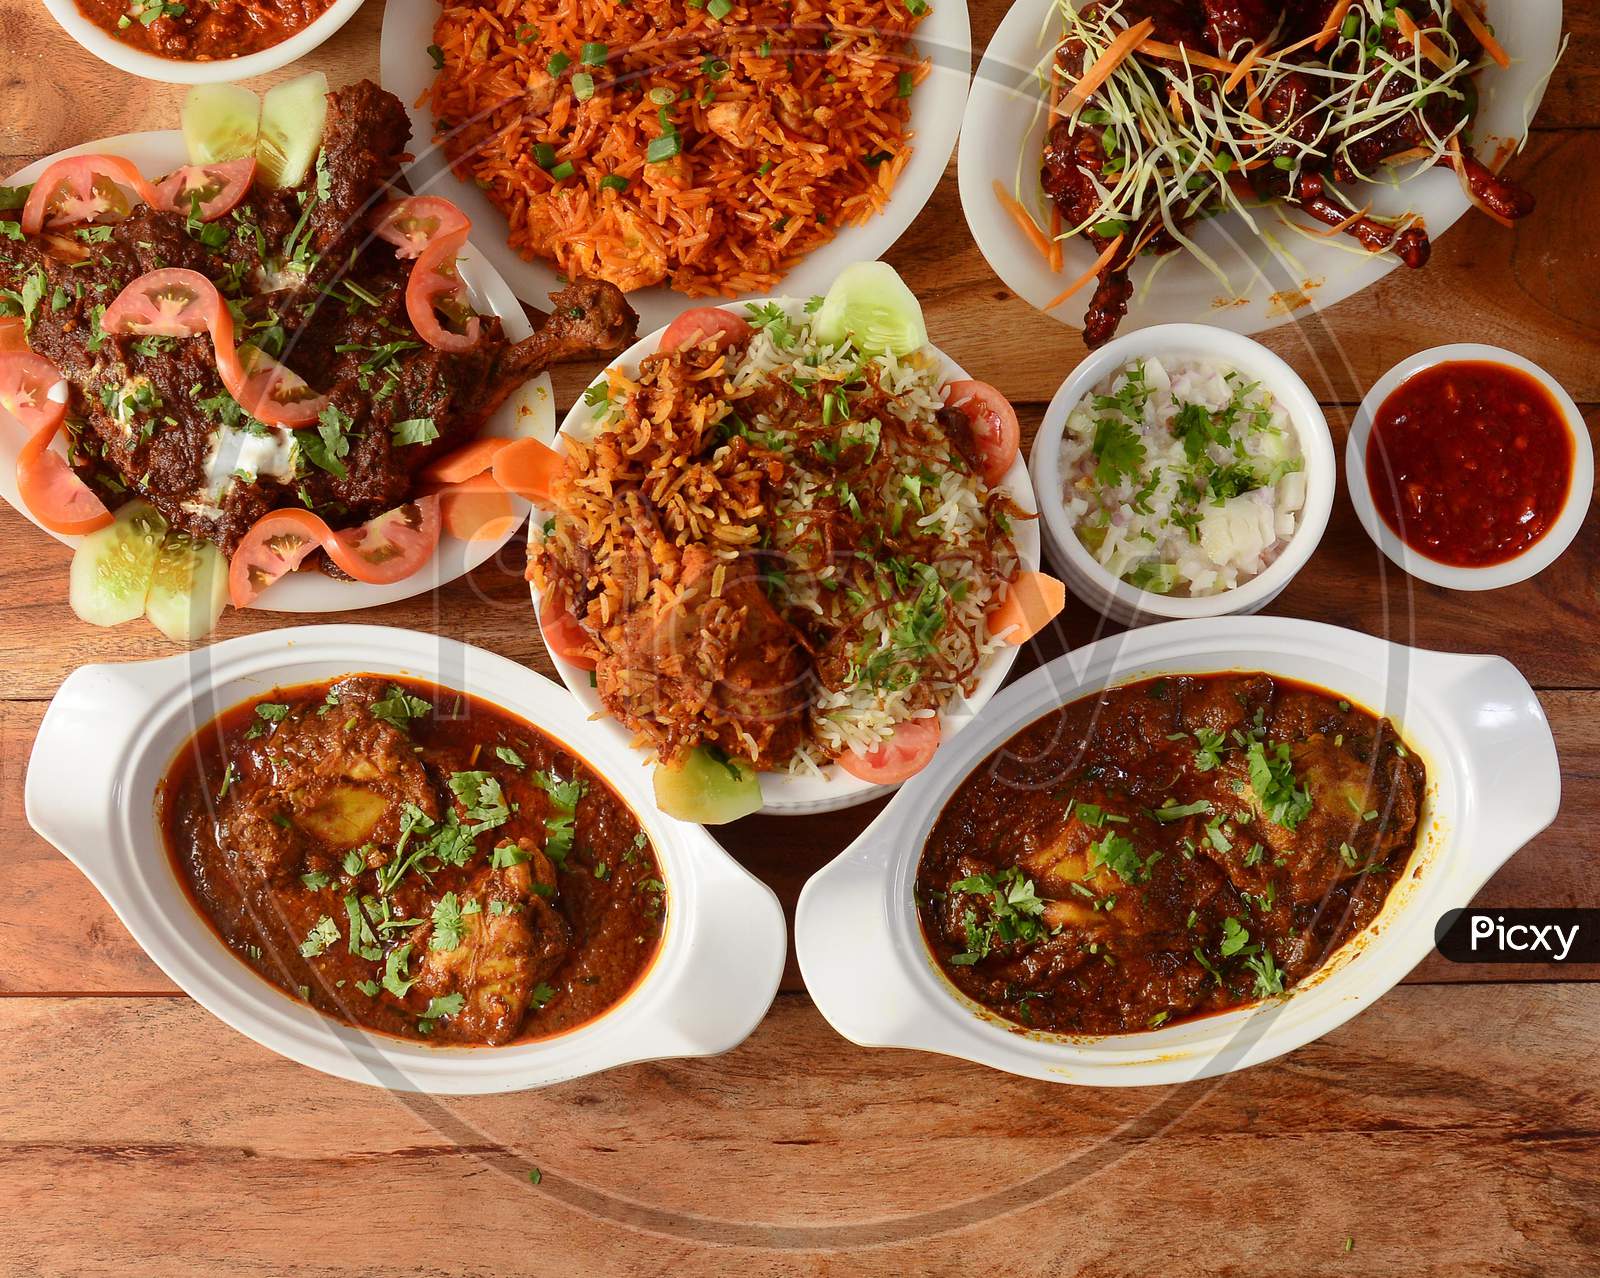 Assorted Indian Foods Chicken Biryani,Chicken Masala,Chicken Korma And Chicken Lollipop On Wooden Background. Dishes And Appetizers Of Indian Cuisine